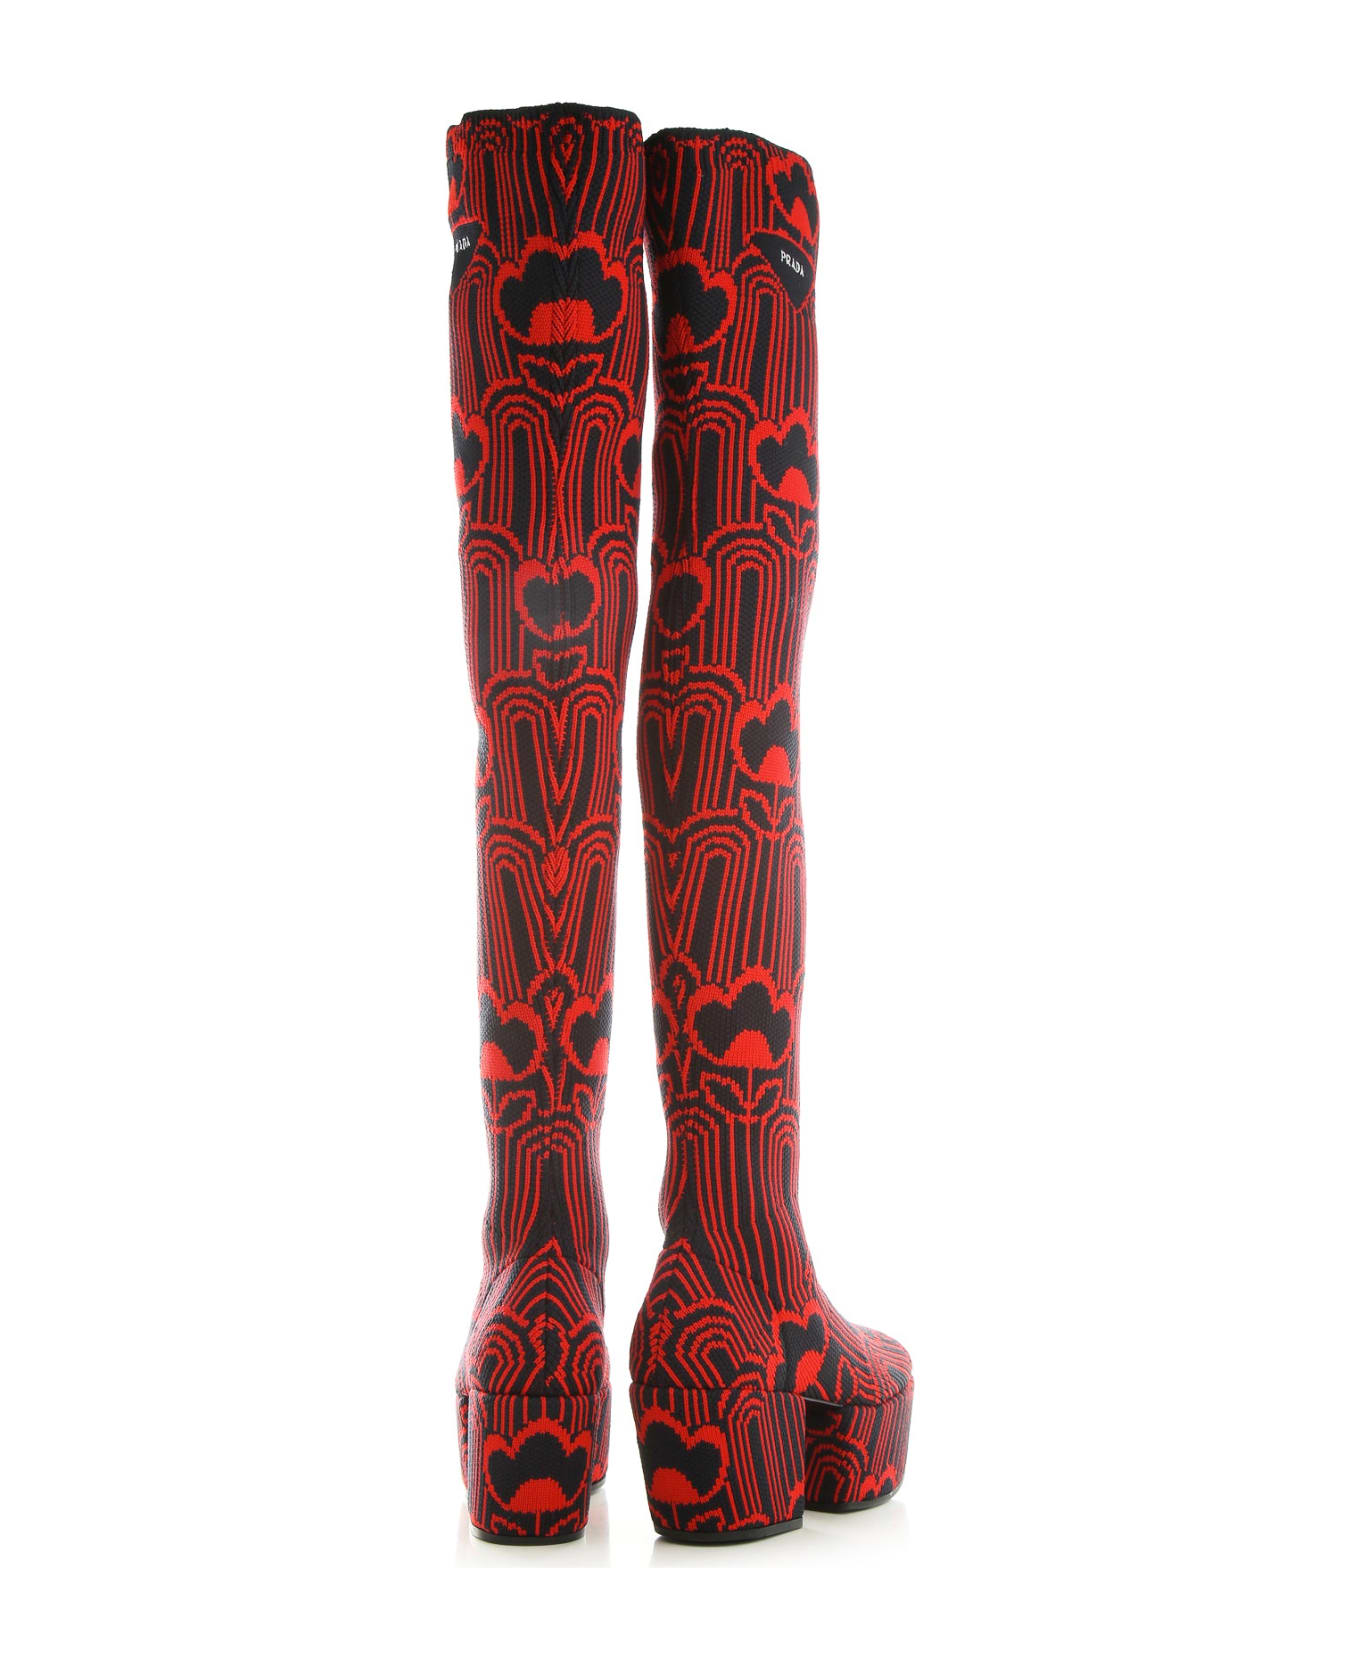 Prada Jaquard Embroidered Boots - Red